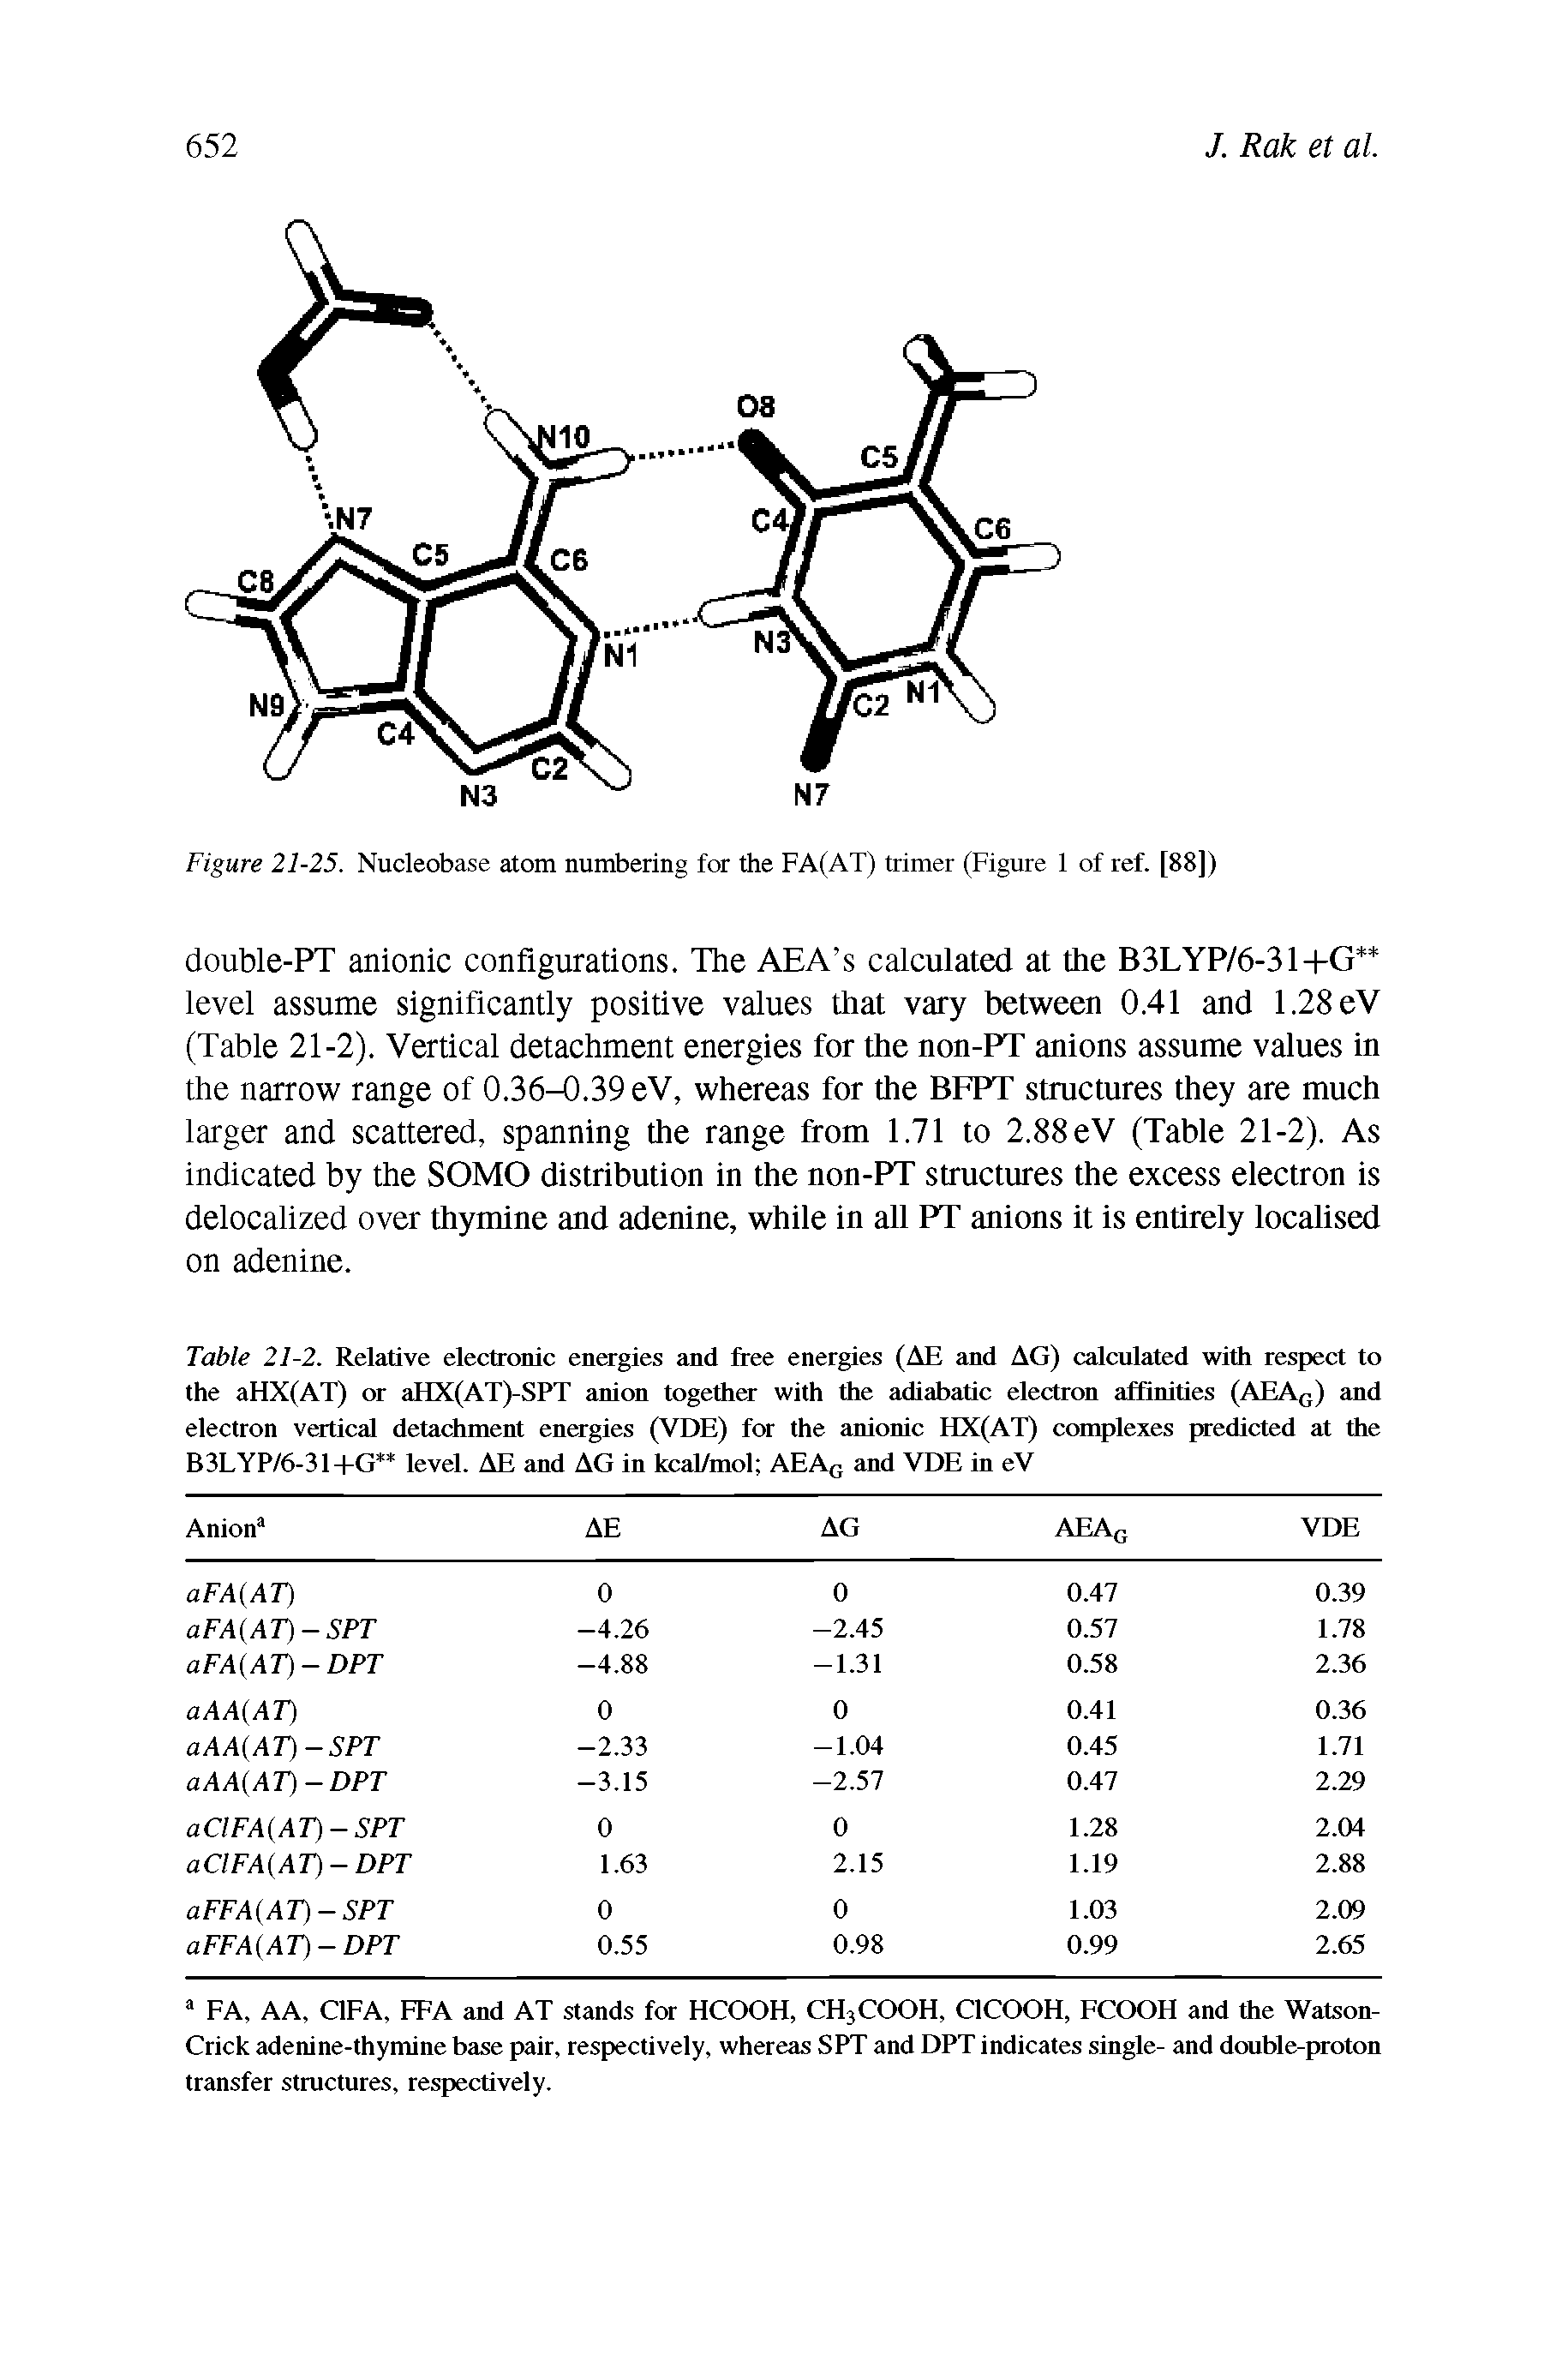 Table 21-2. Relative electronic energies and free energies (AE and AG) calculated with respect to the aHX(AT) or aHX(AT)-SPT anion together with the adiabatic electron affinities (AEAG) and electron vertical detachment energies (VDE) for the anionic HX(AT) complexes predicted at the B3LYP/6-31+G" level. AE and AG in kcal/mol AEAG and VDE in eV...